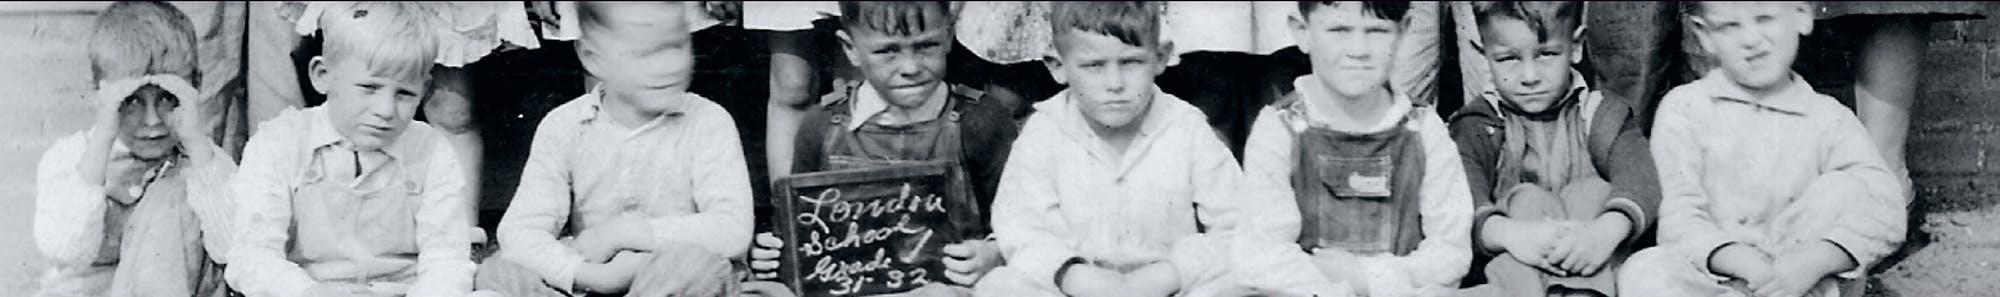 1931 first grade students from New London school that exploded. 